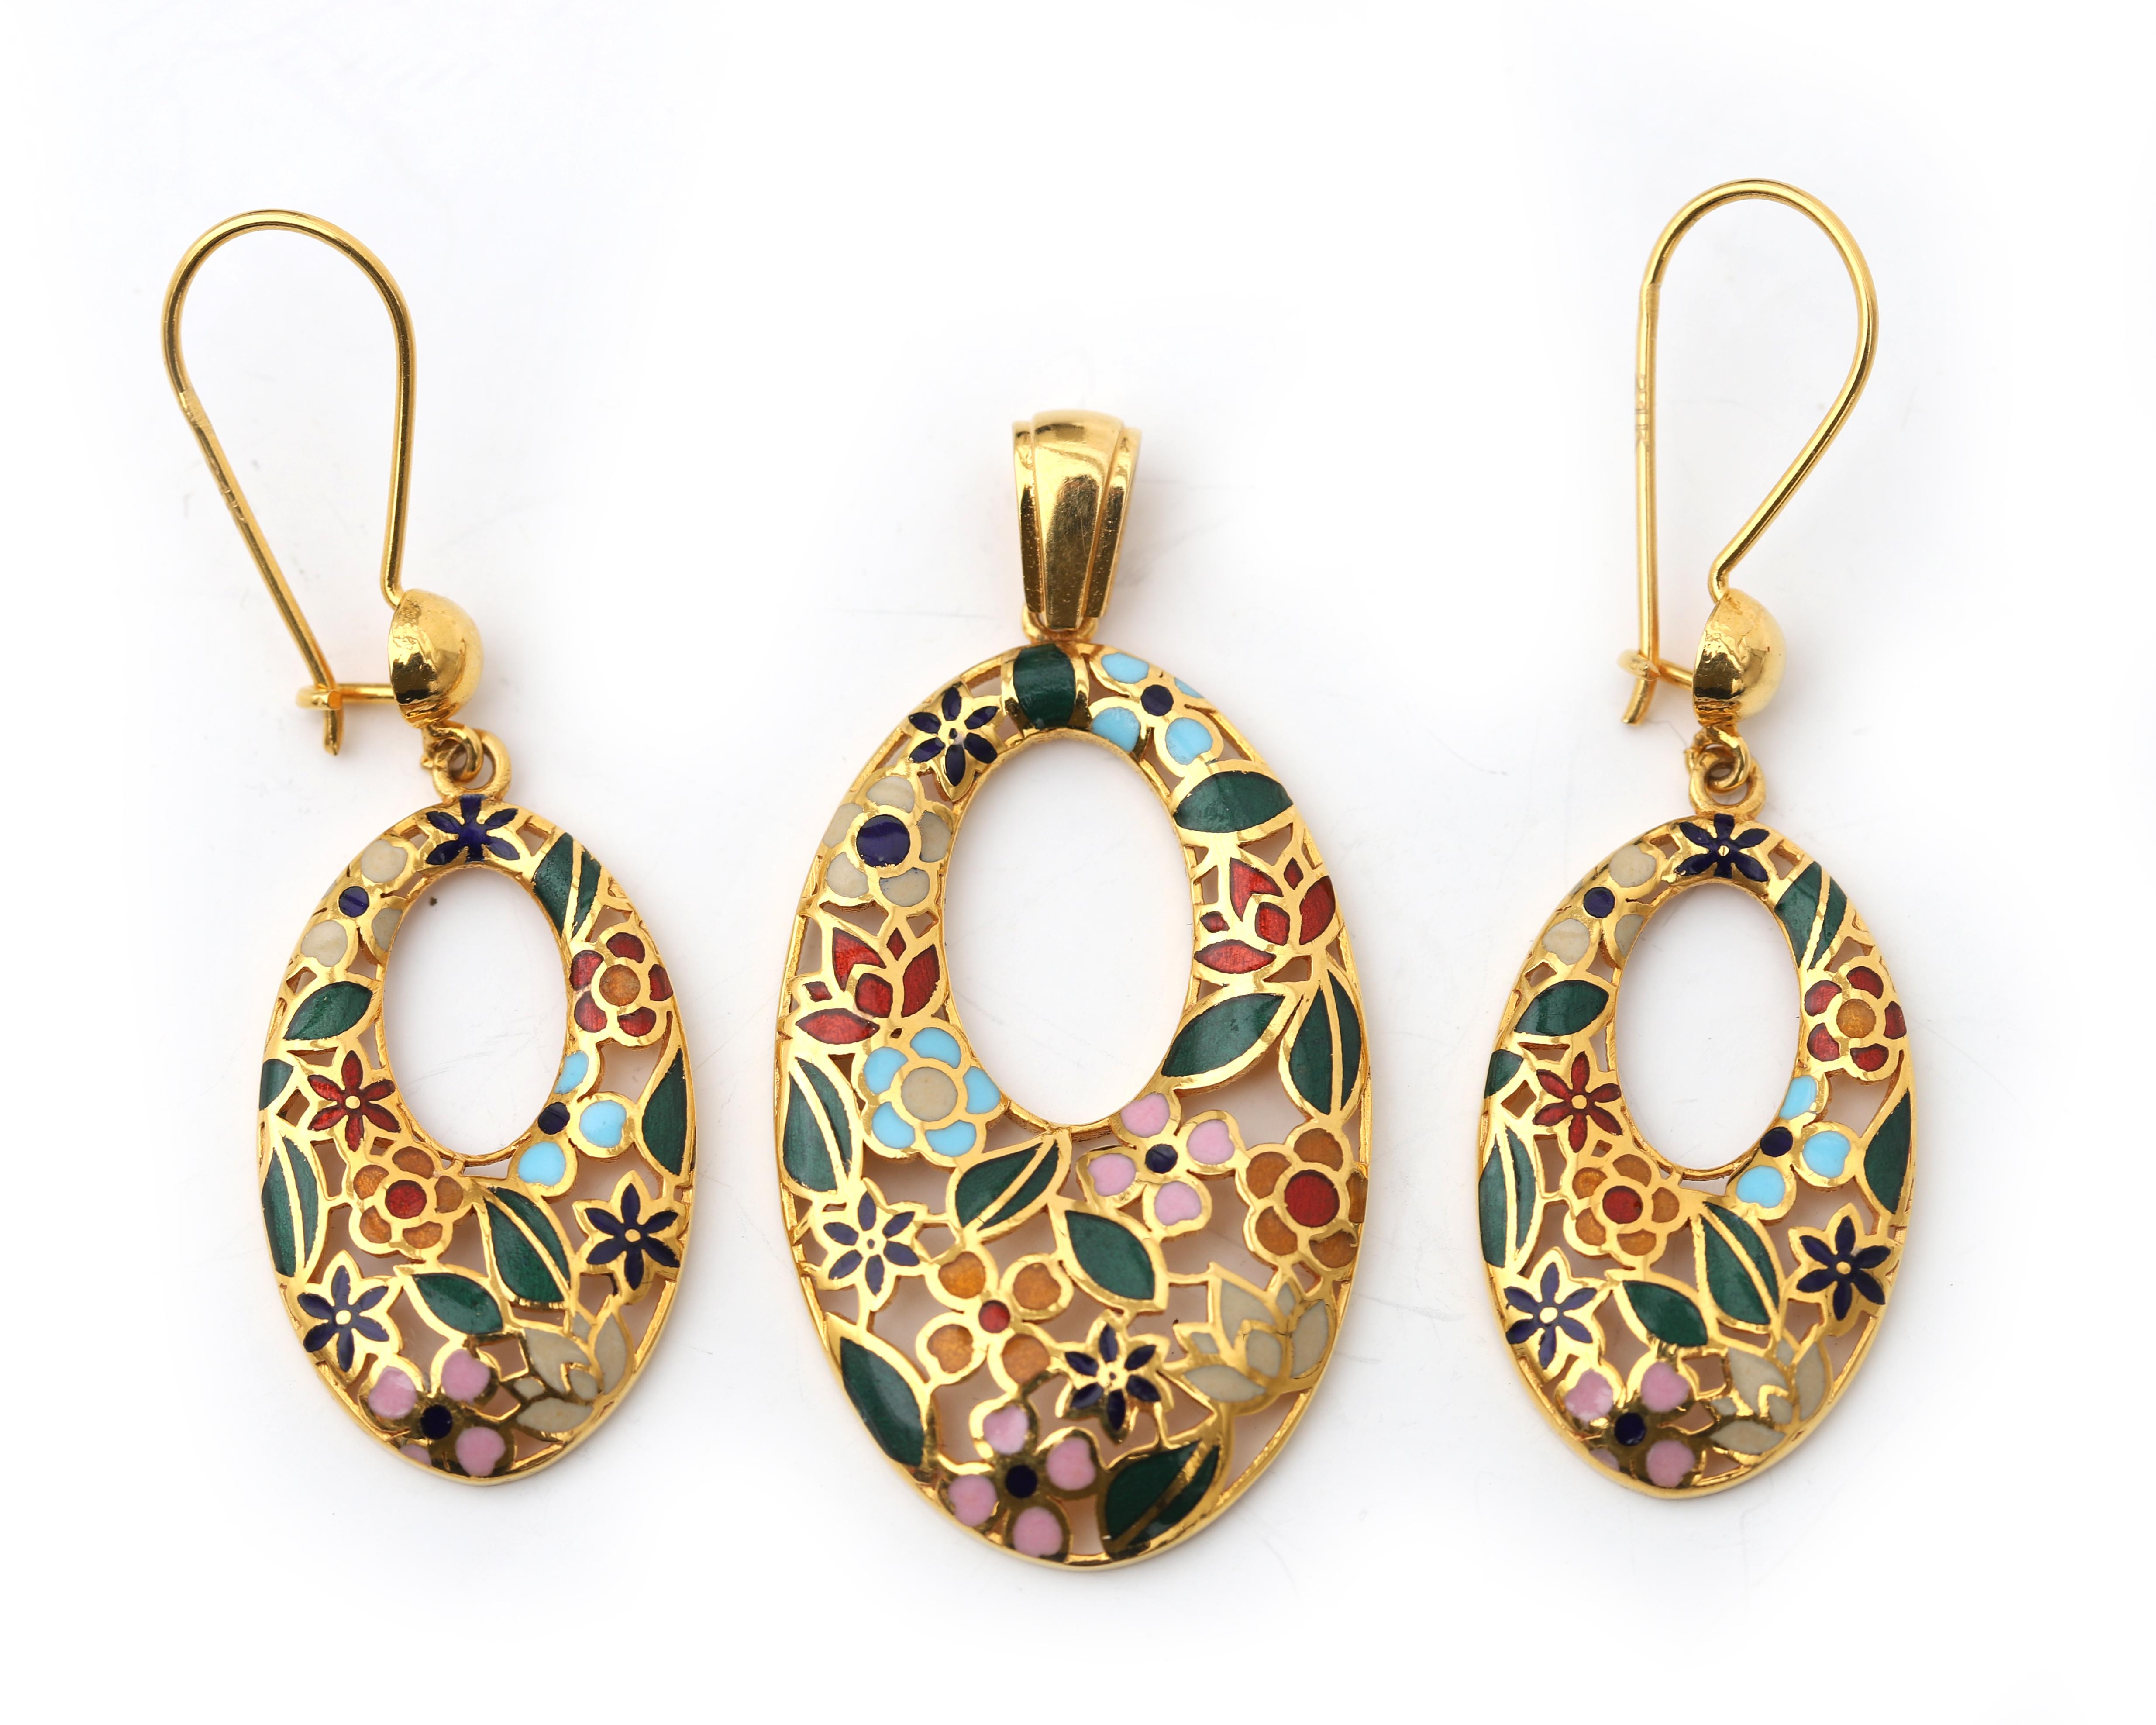 A 20 karat gold jewelery set with enamels - Image 4 of 6